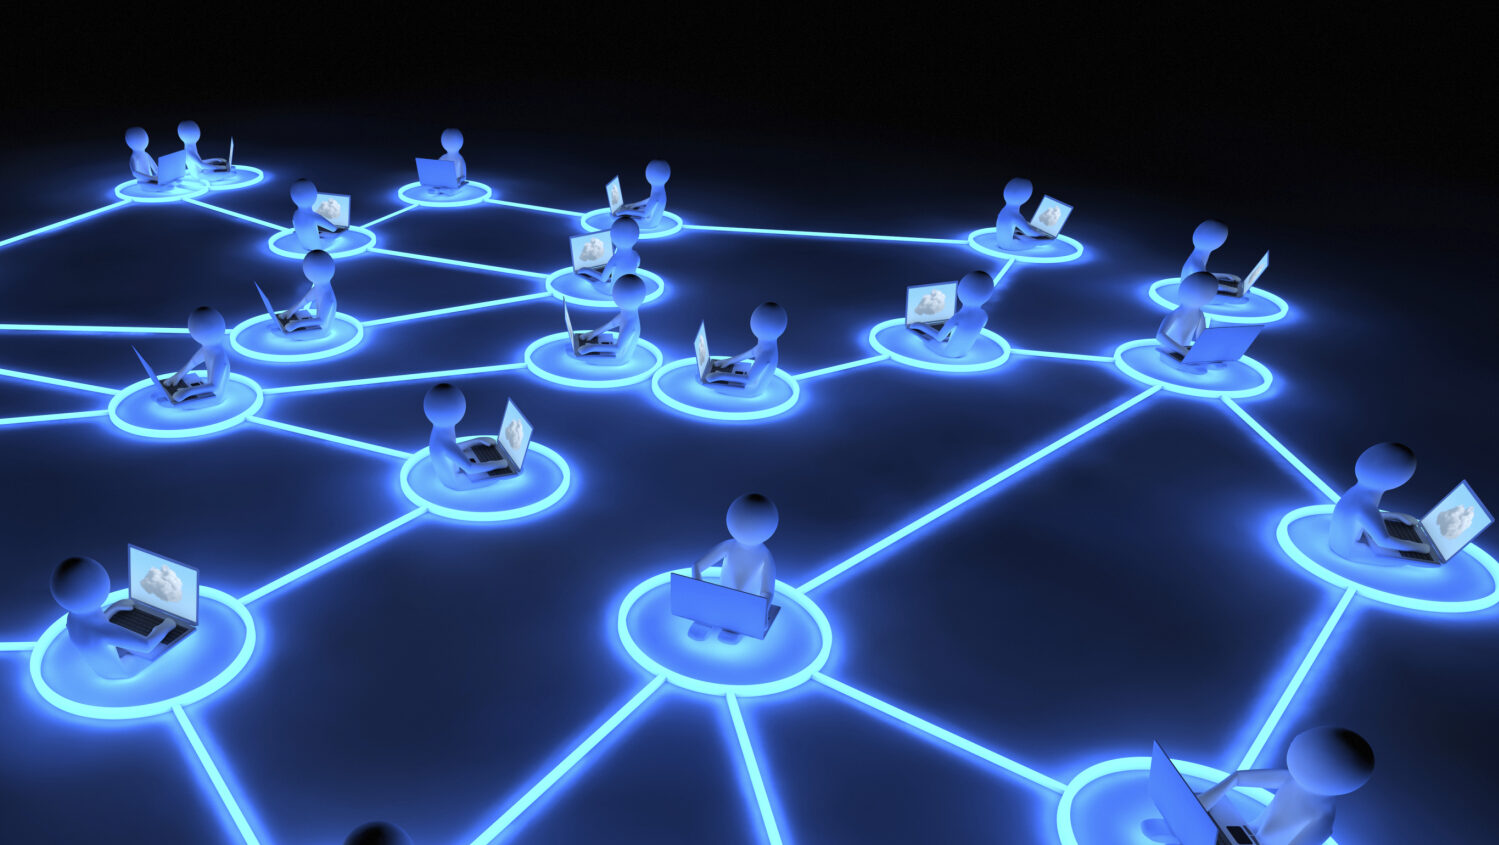 network concept with interconnected nodes in neon blue